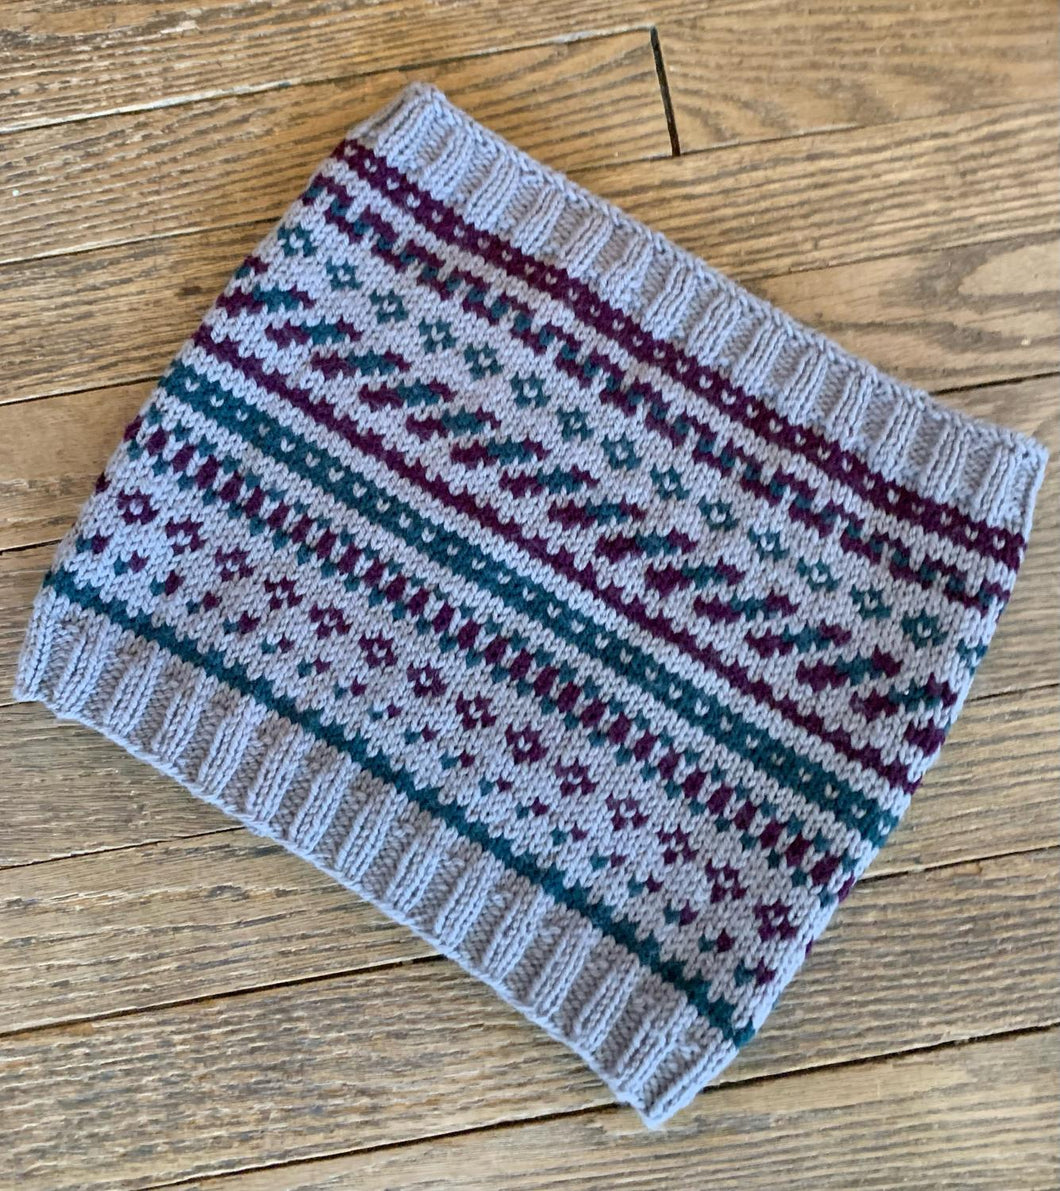 Introduction to Fair Isle Knitting with Jodi Horgan Saturday, March 16th from 1:30-3:30pm